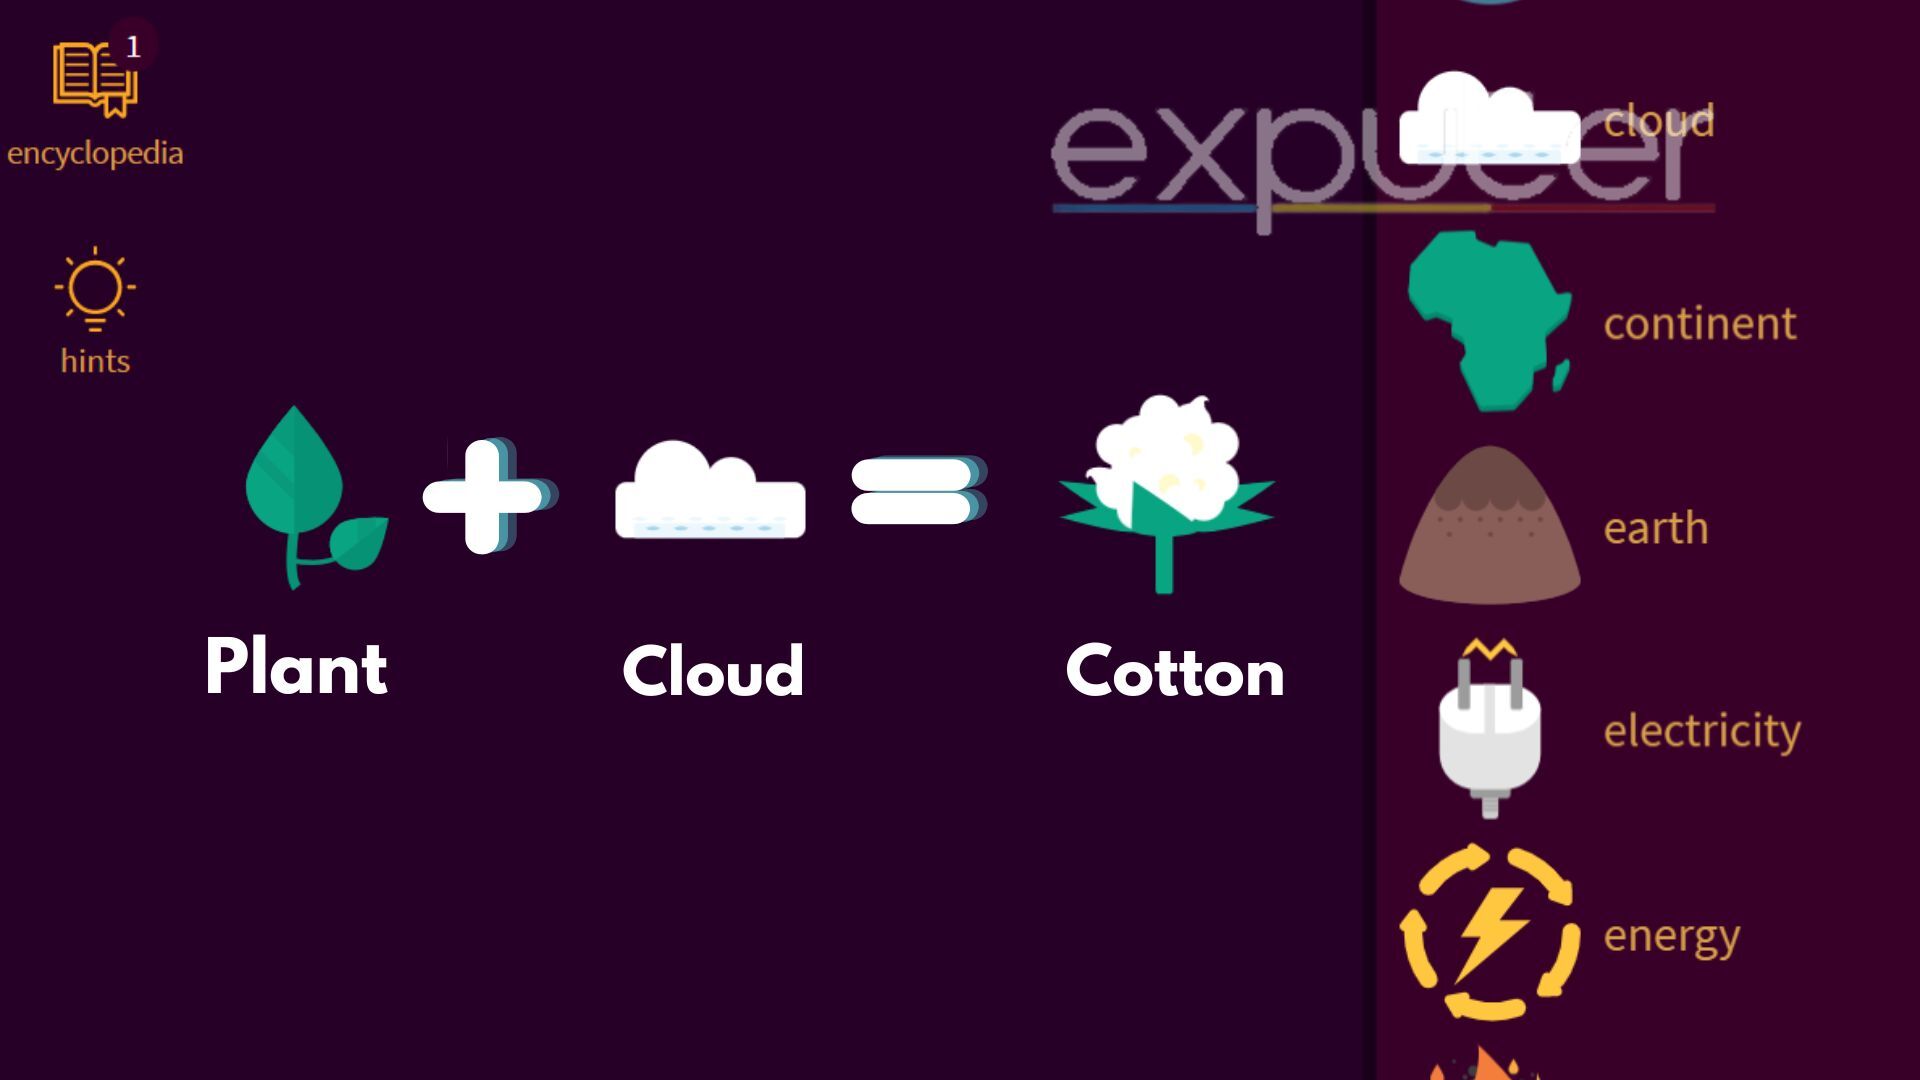 Little Alchemy 2: How to make cotton by Plant and Cloud